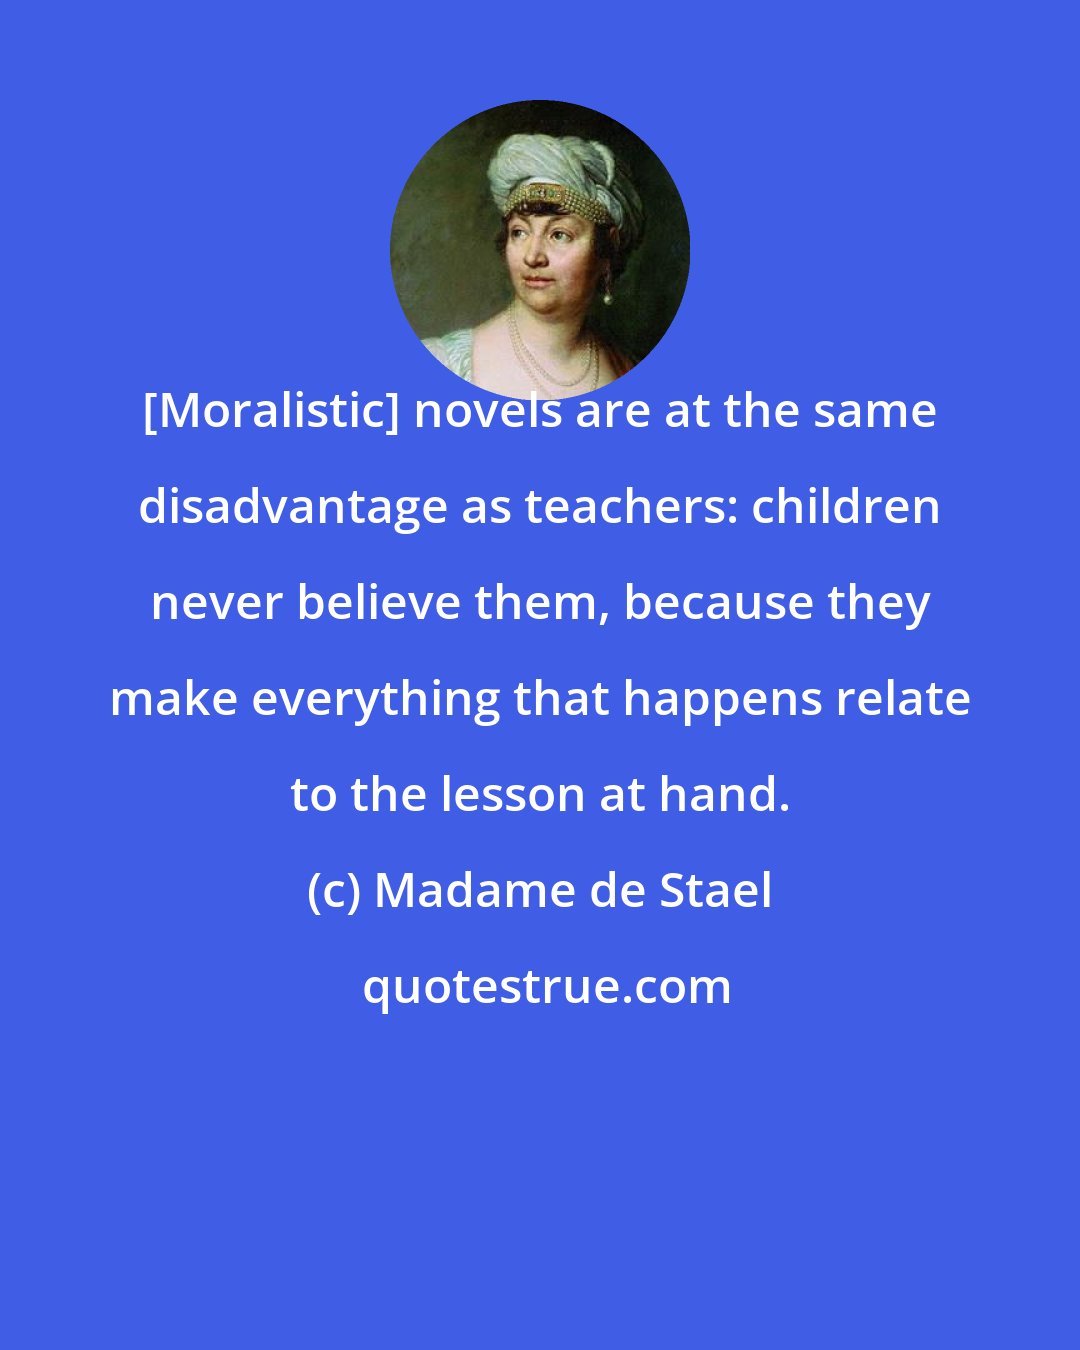 Madame de Stael: [Moralistic] novels are at the same disadvantage as teachers: children never believe them, because they make everything that happens relate to the lesson at hand.